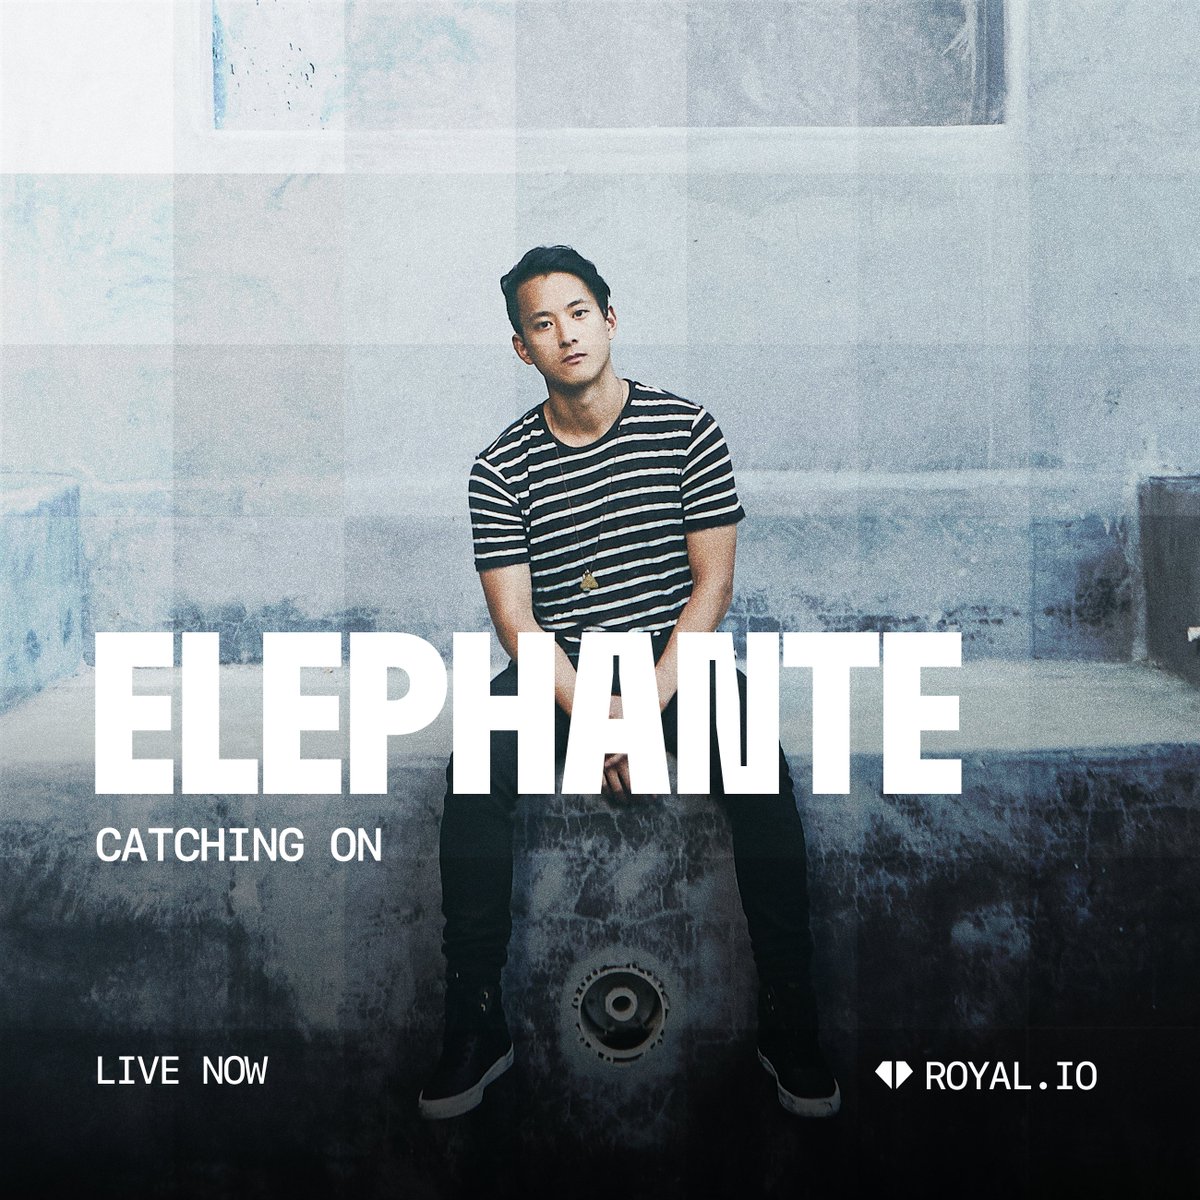 🔥New drop today! And this time, we’re trying a new format. @iamtheELEPHANTE is sharing ownership in his hit single ‘Catching On’. Enter now for a chance to own a piece of the song. Closes Aug 4 at 8pm ET. royal.io/editions/eleph…